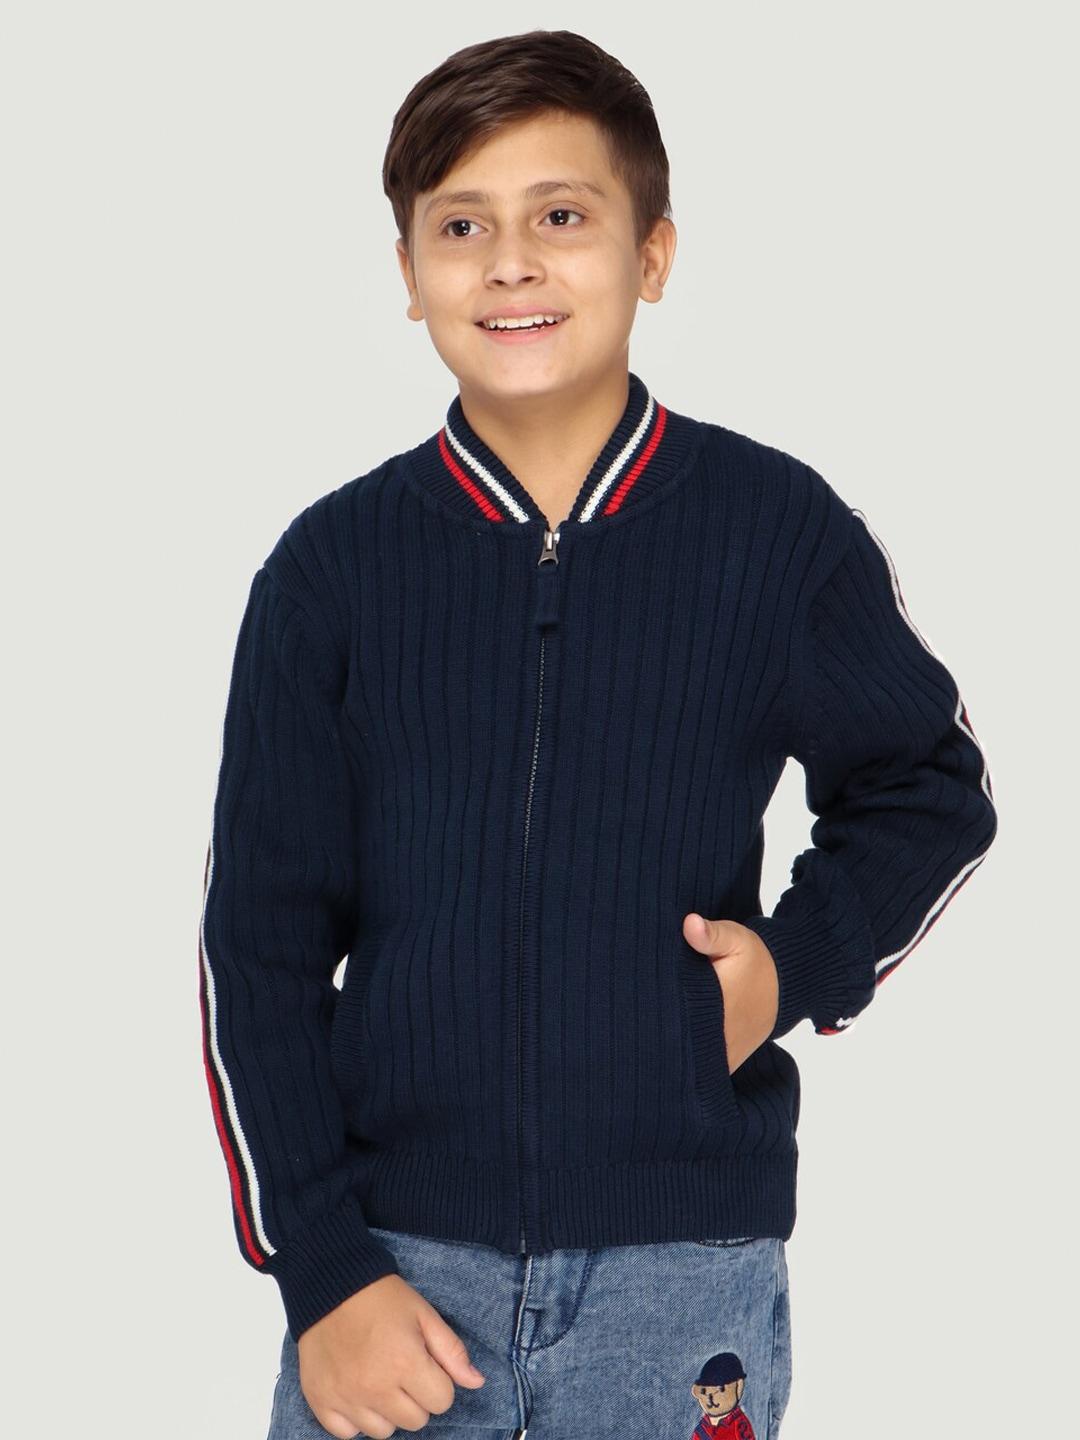 lasnak boys navy blue & red ribbed cotton sweater